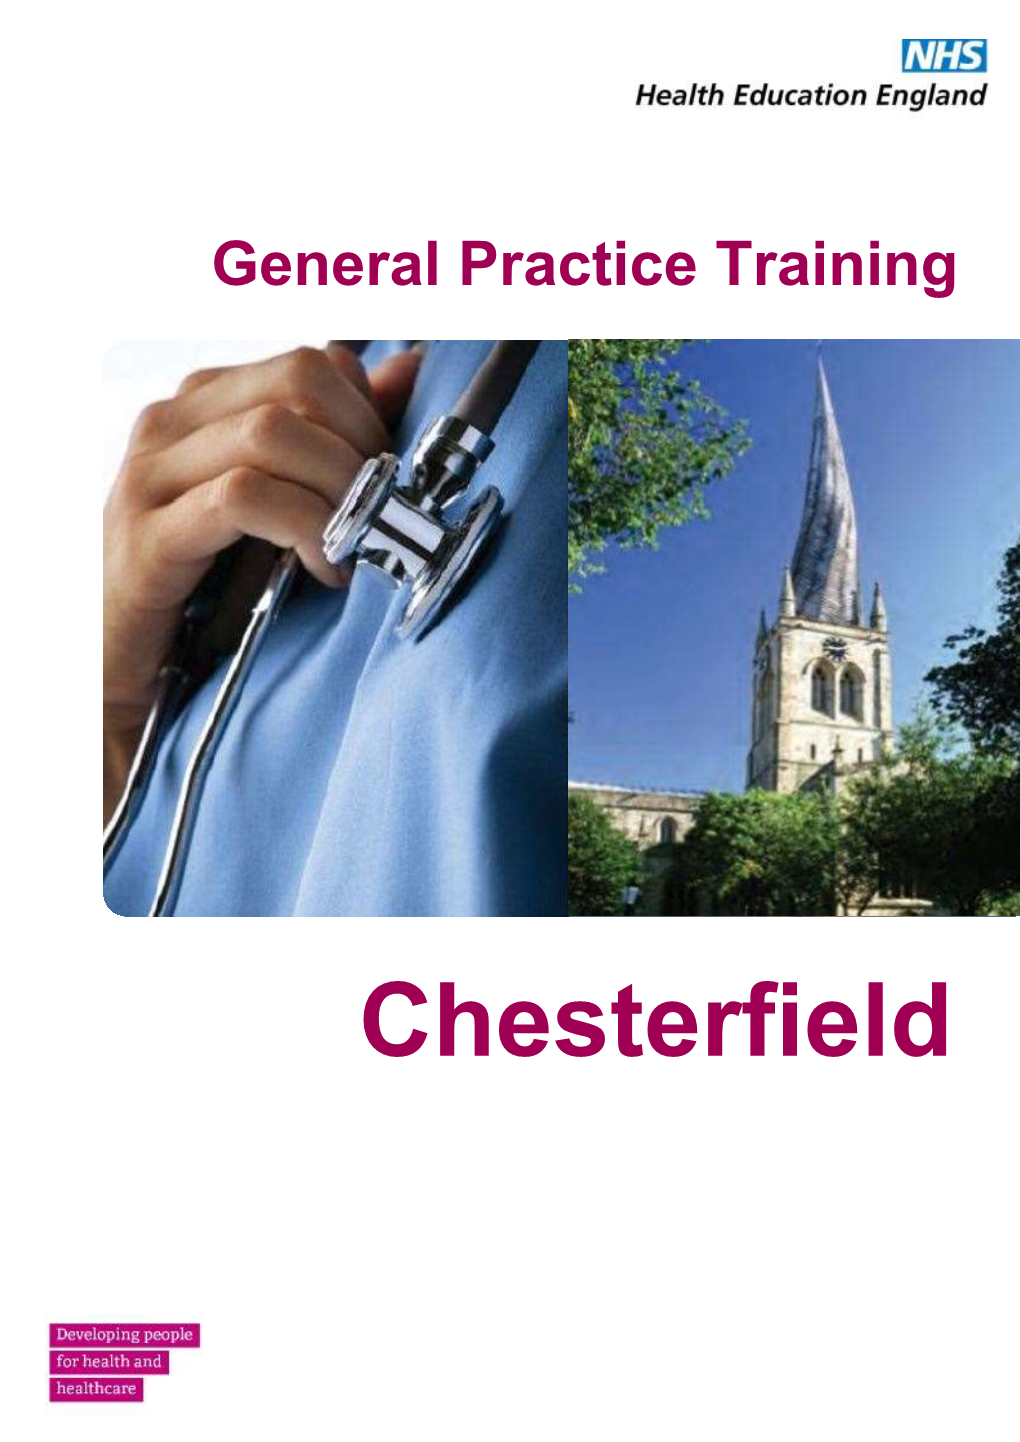 GP Training in Chesterfield